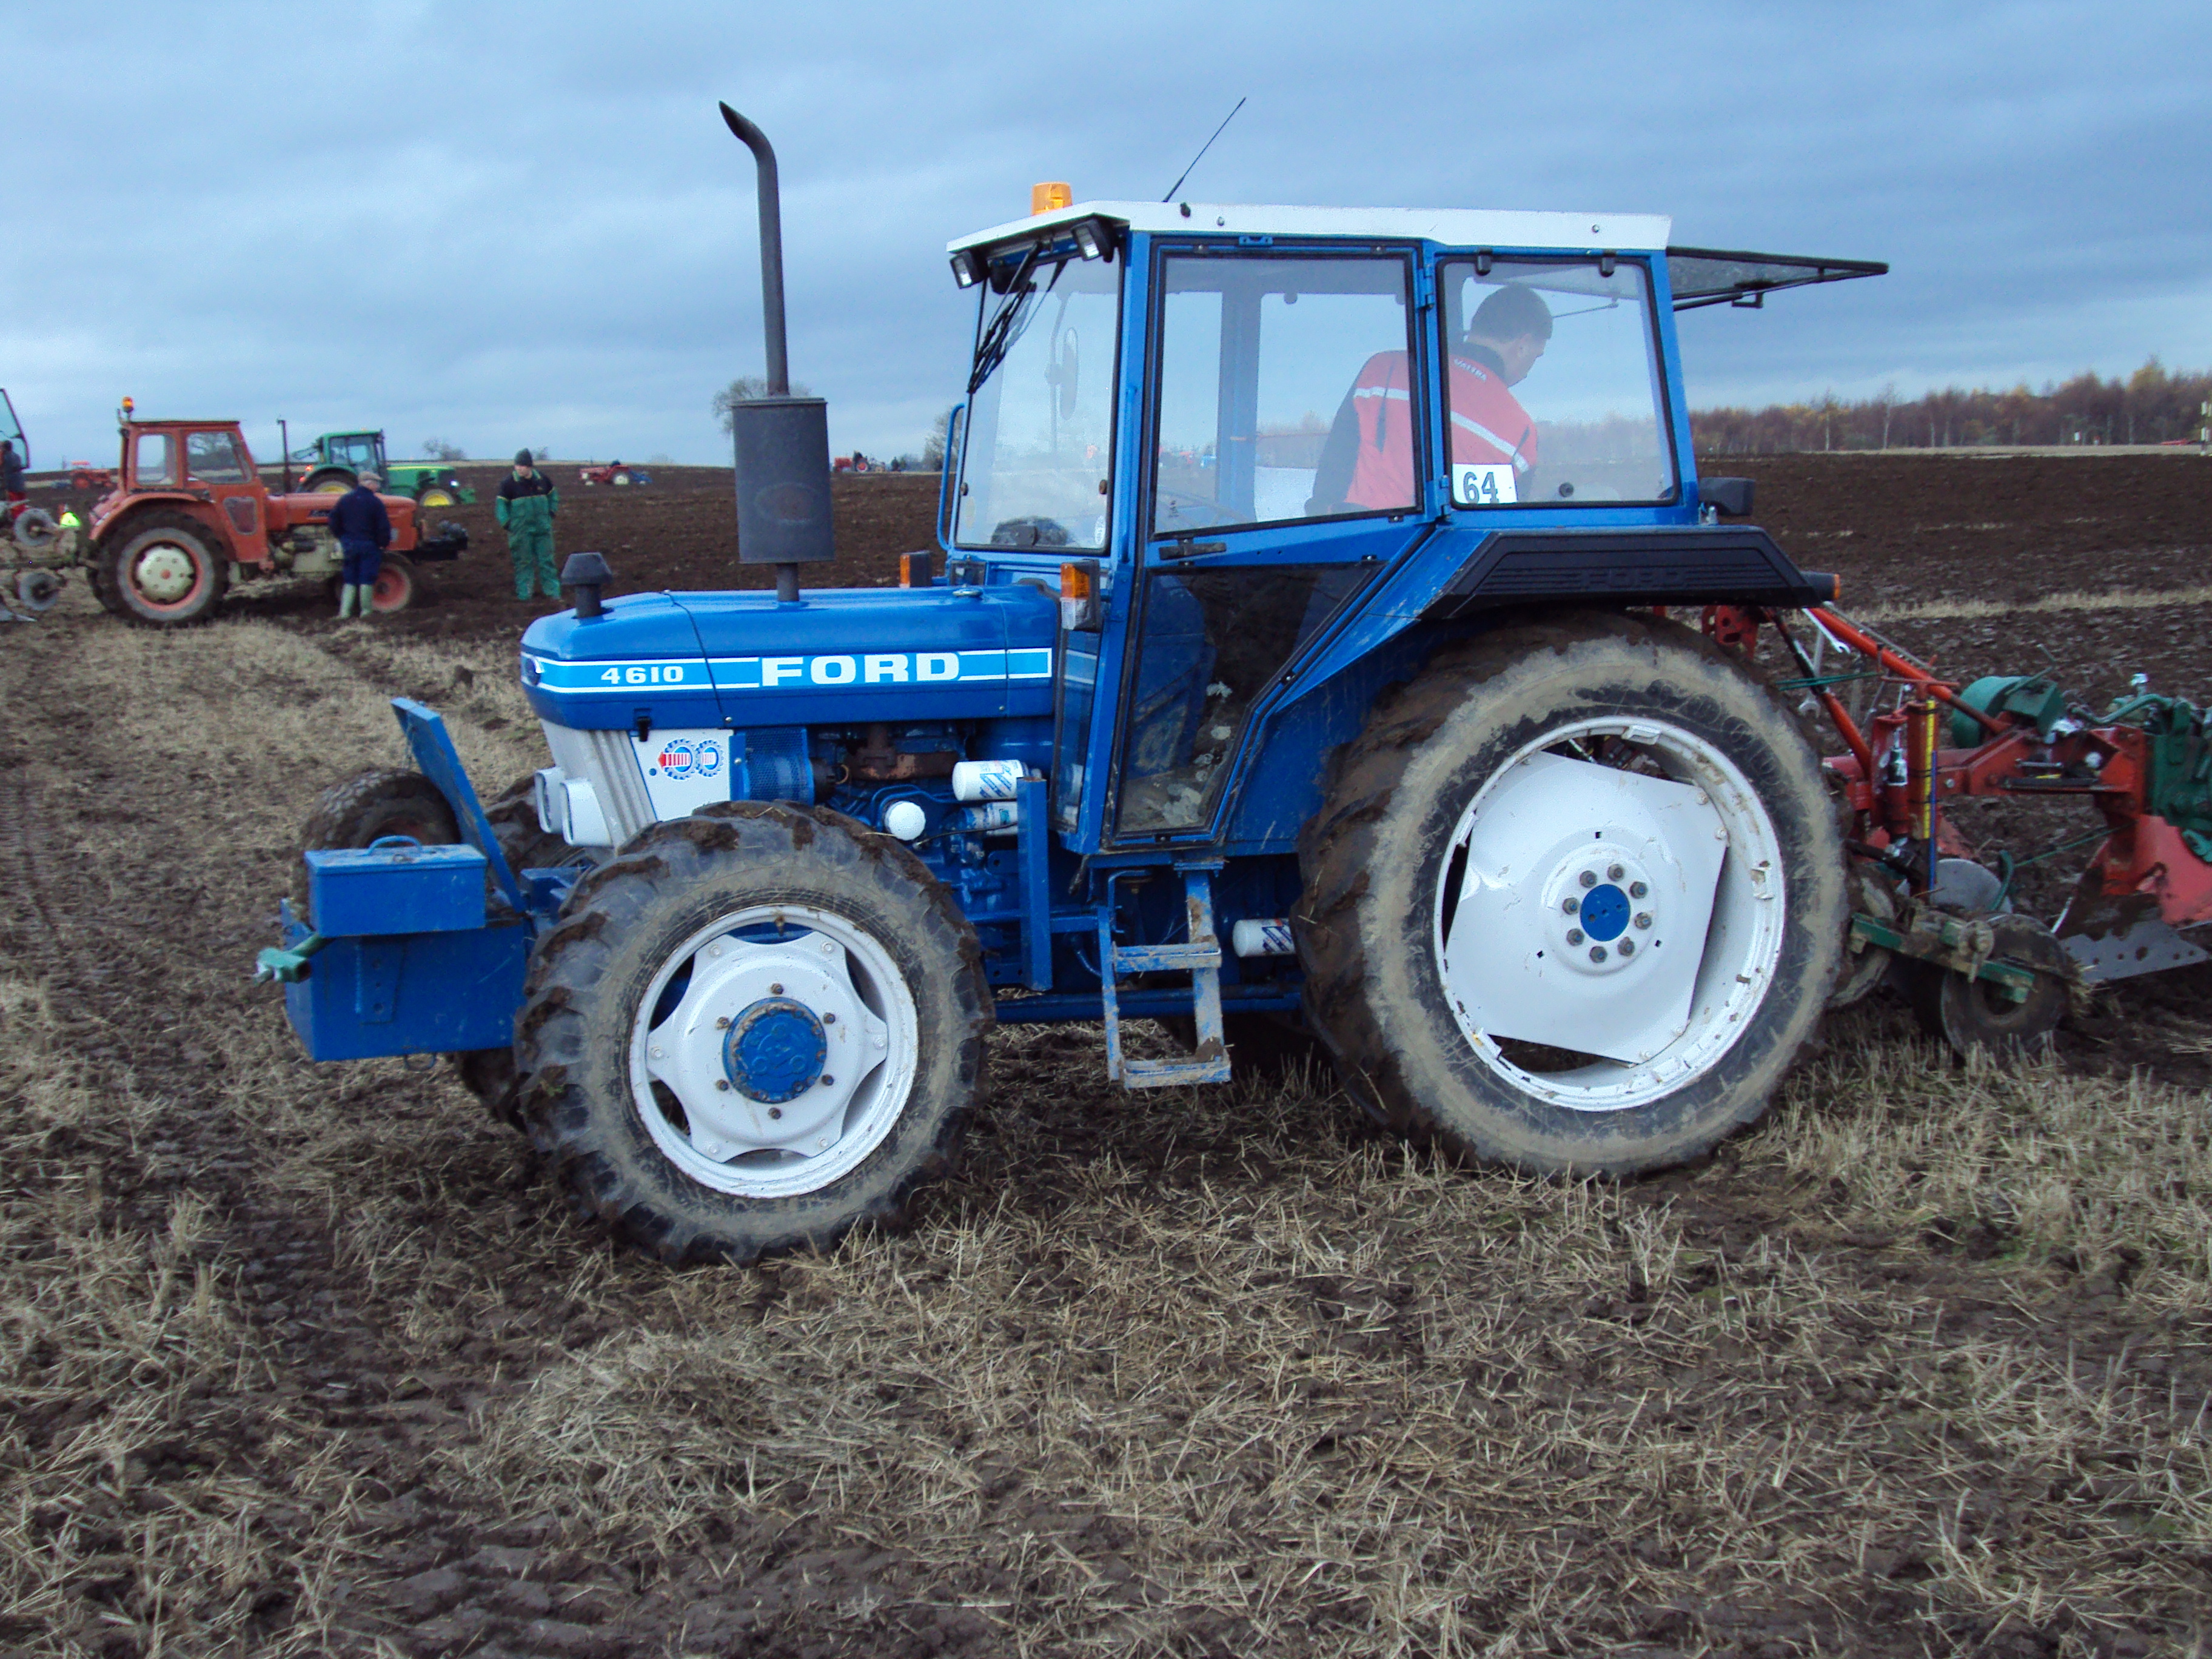 Ford 4610 orchard tractor